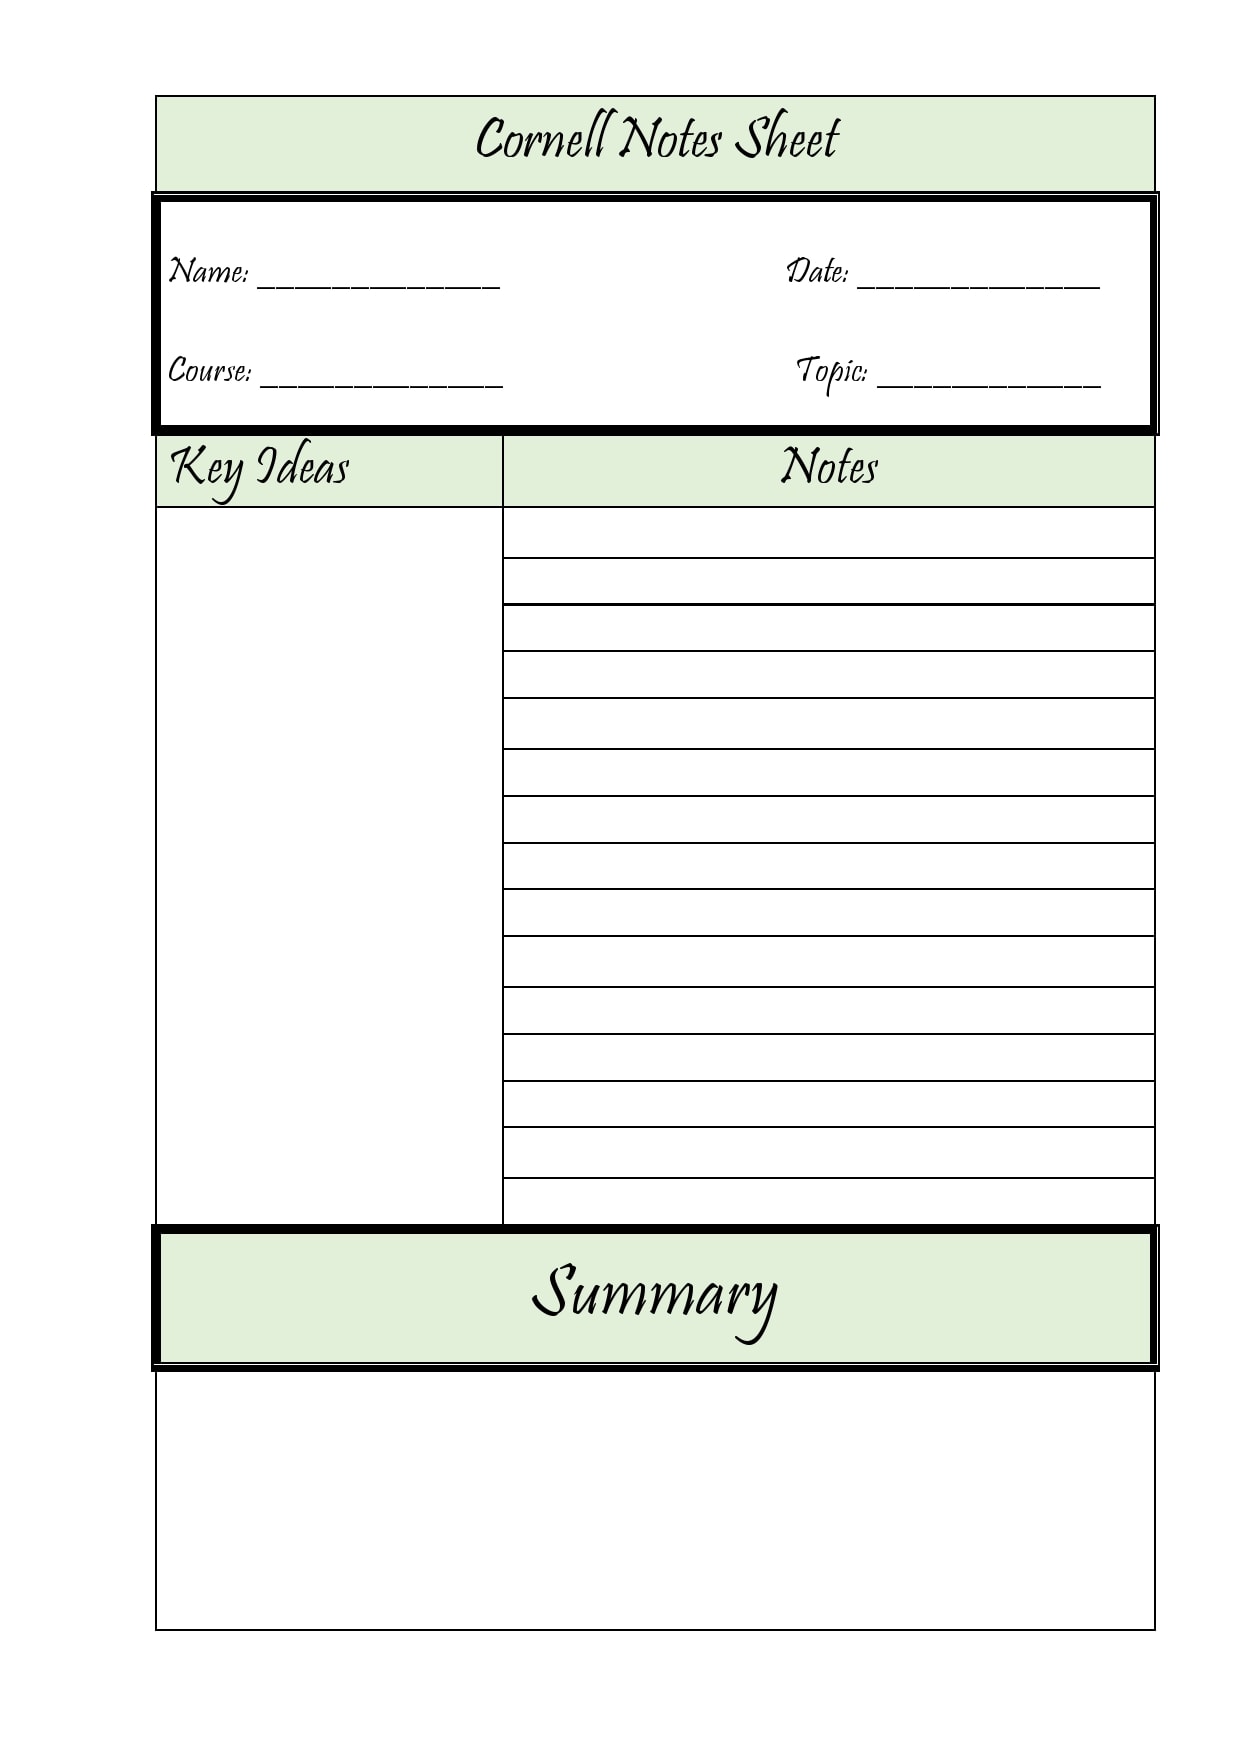 28 Printable Cornell Notes Templates Free TemplateArchive